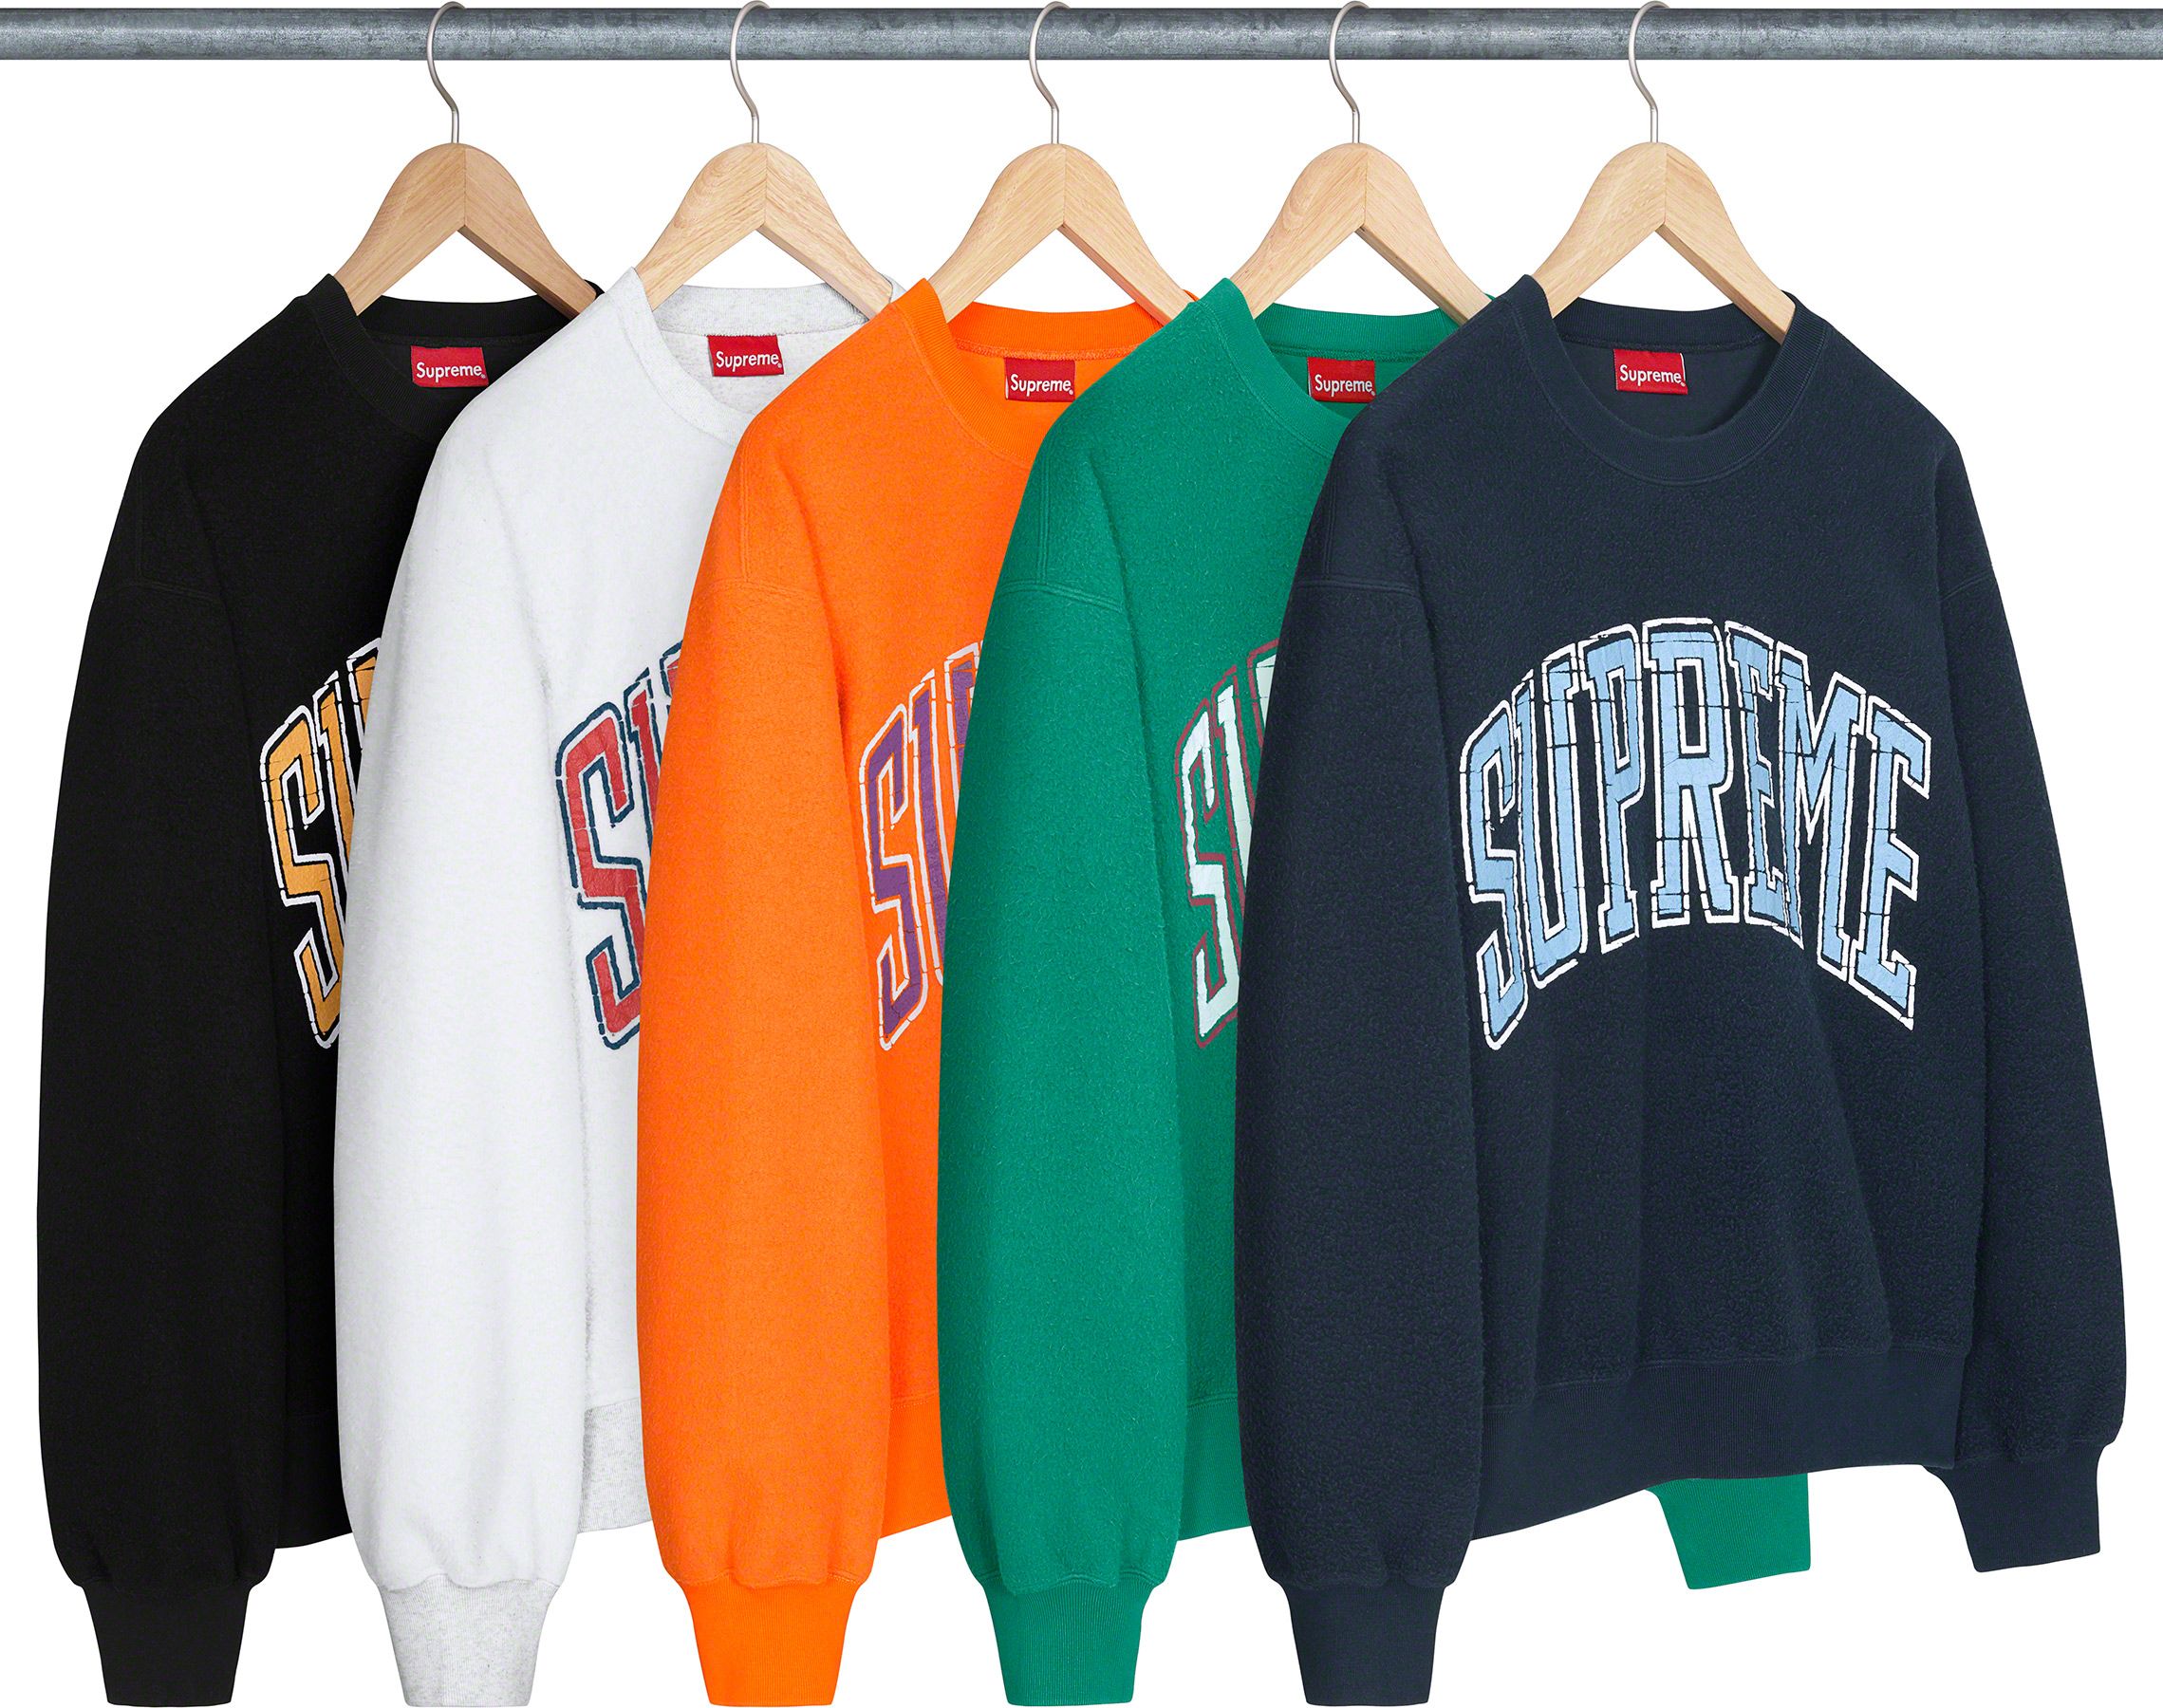 Inside Out Crewneck - fall winter 2023 - Supreme